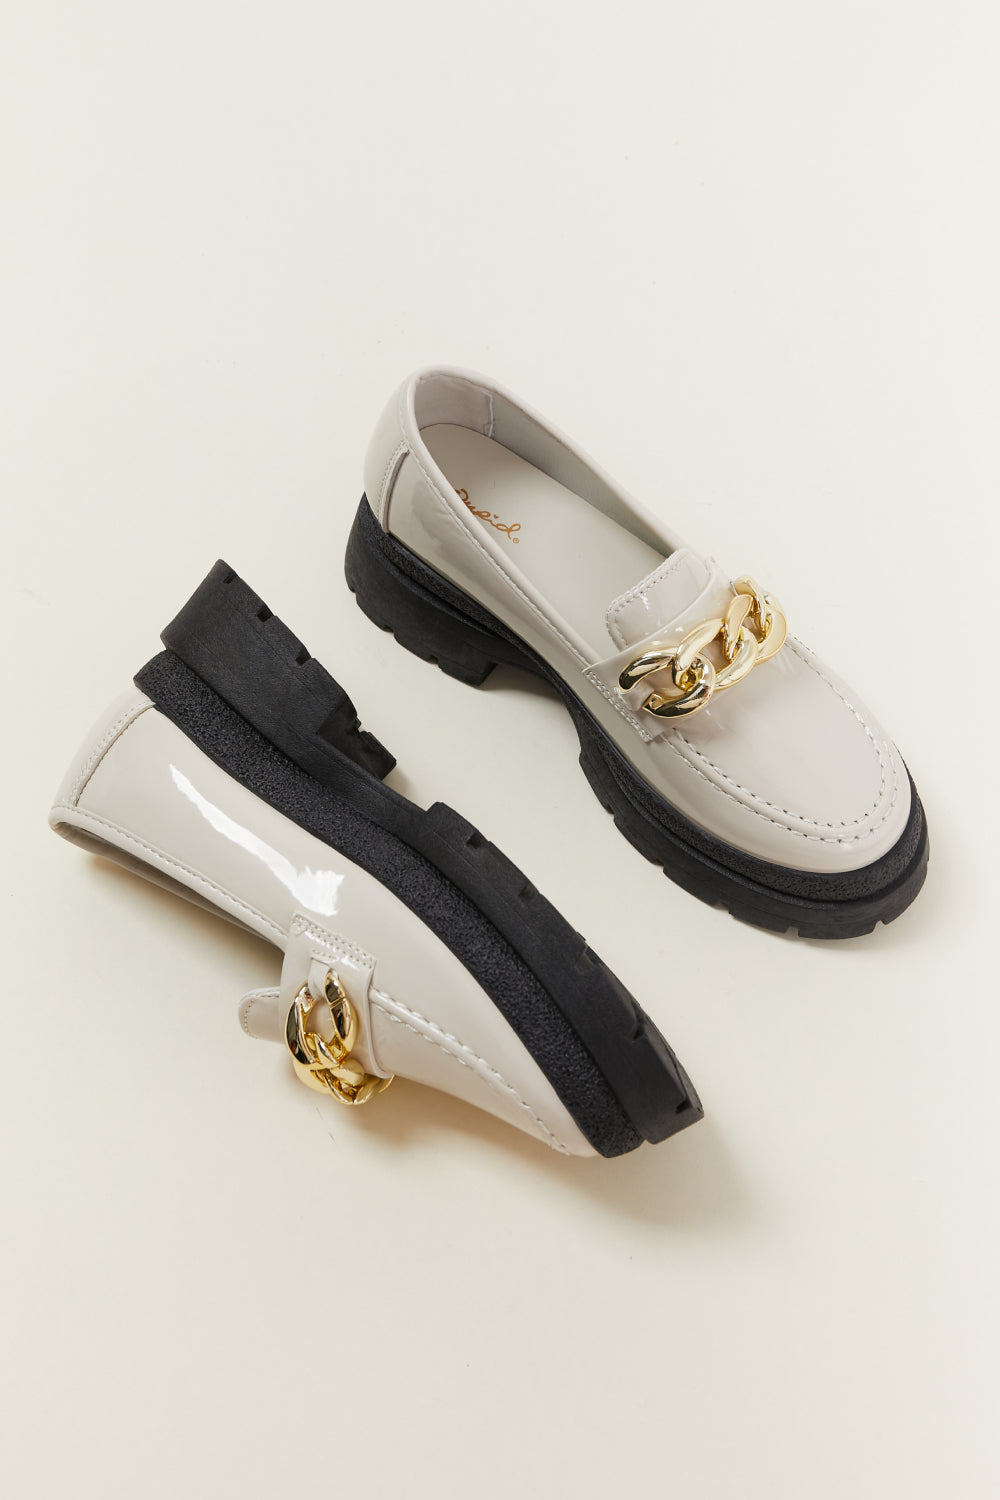 Qupid Start the Day Right Platform Oxford Loafers